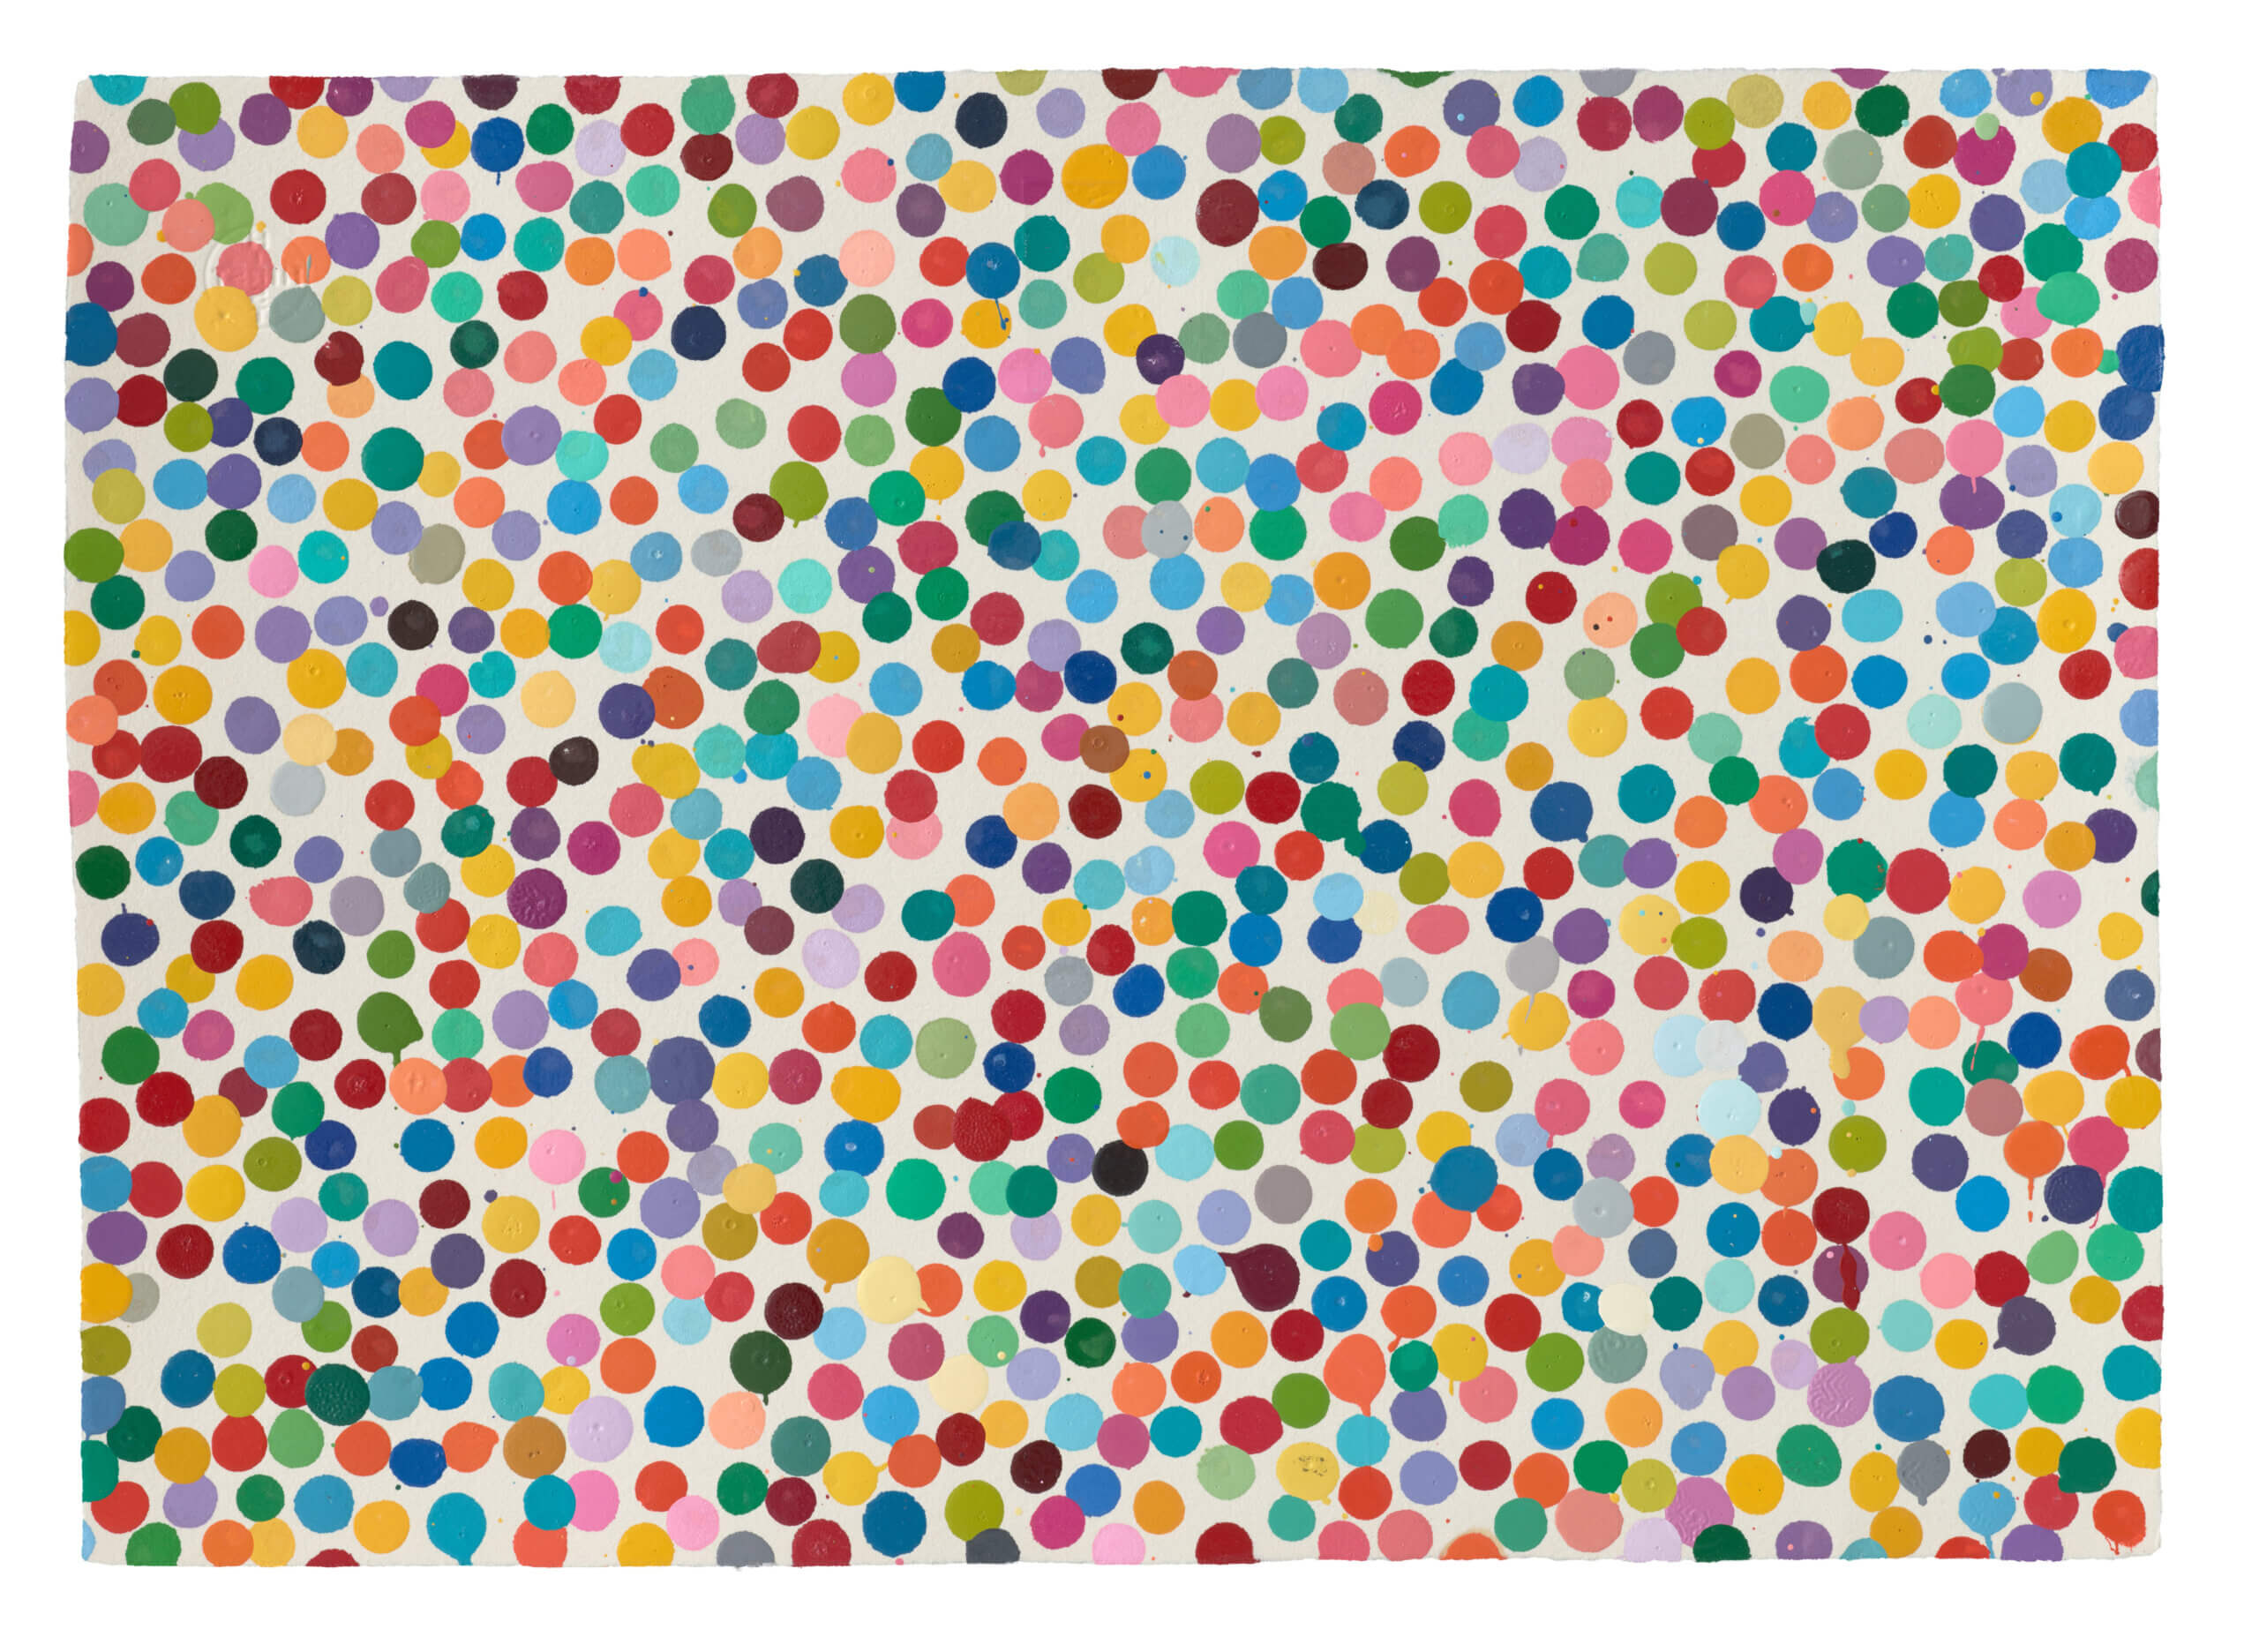 Damien Hirst, 8483. May I stay like this?, 2021